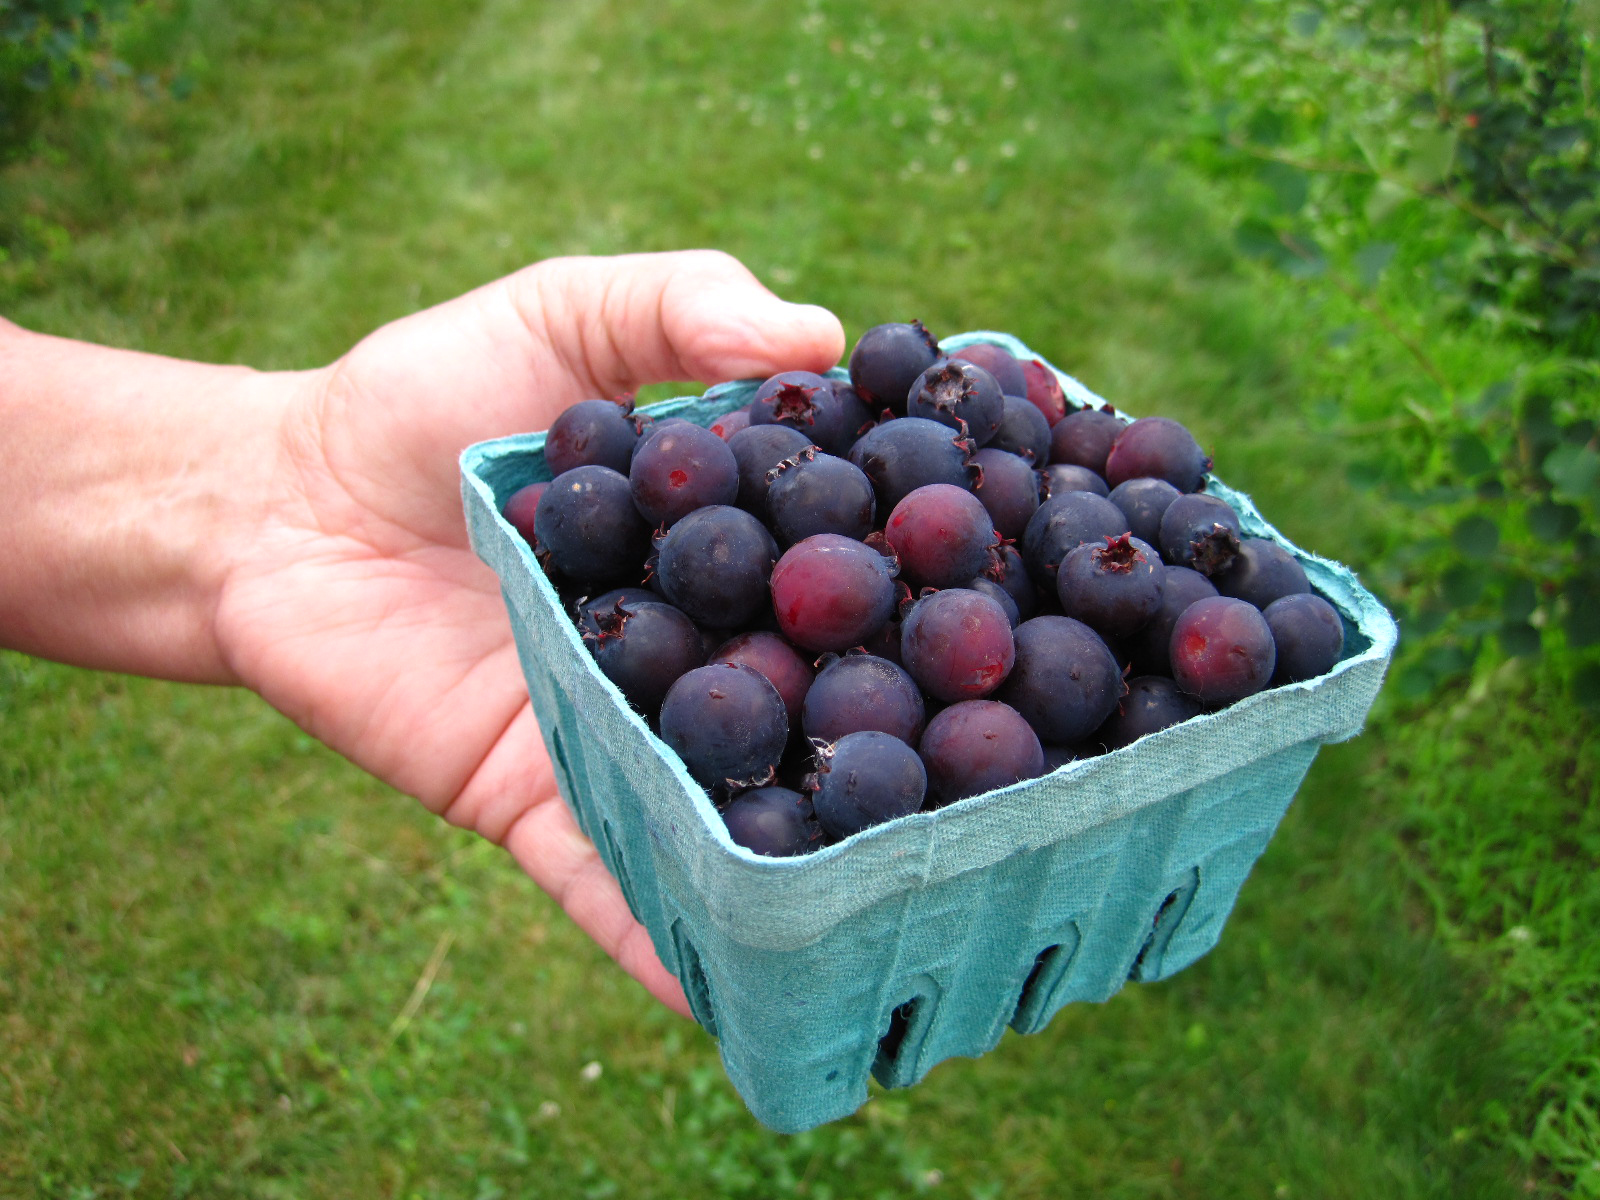 A fruit picker holds a quart basket of Saskatoon berries at G&amp;S Orchards in Walworth, N.Y. on June 26, 2013 .